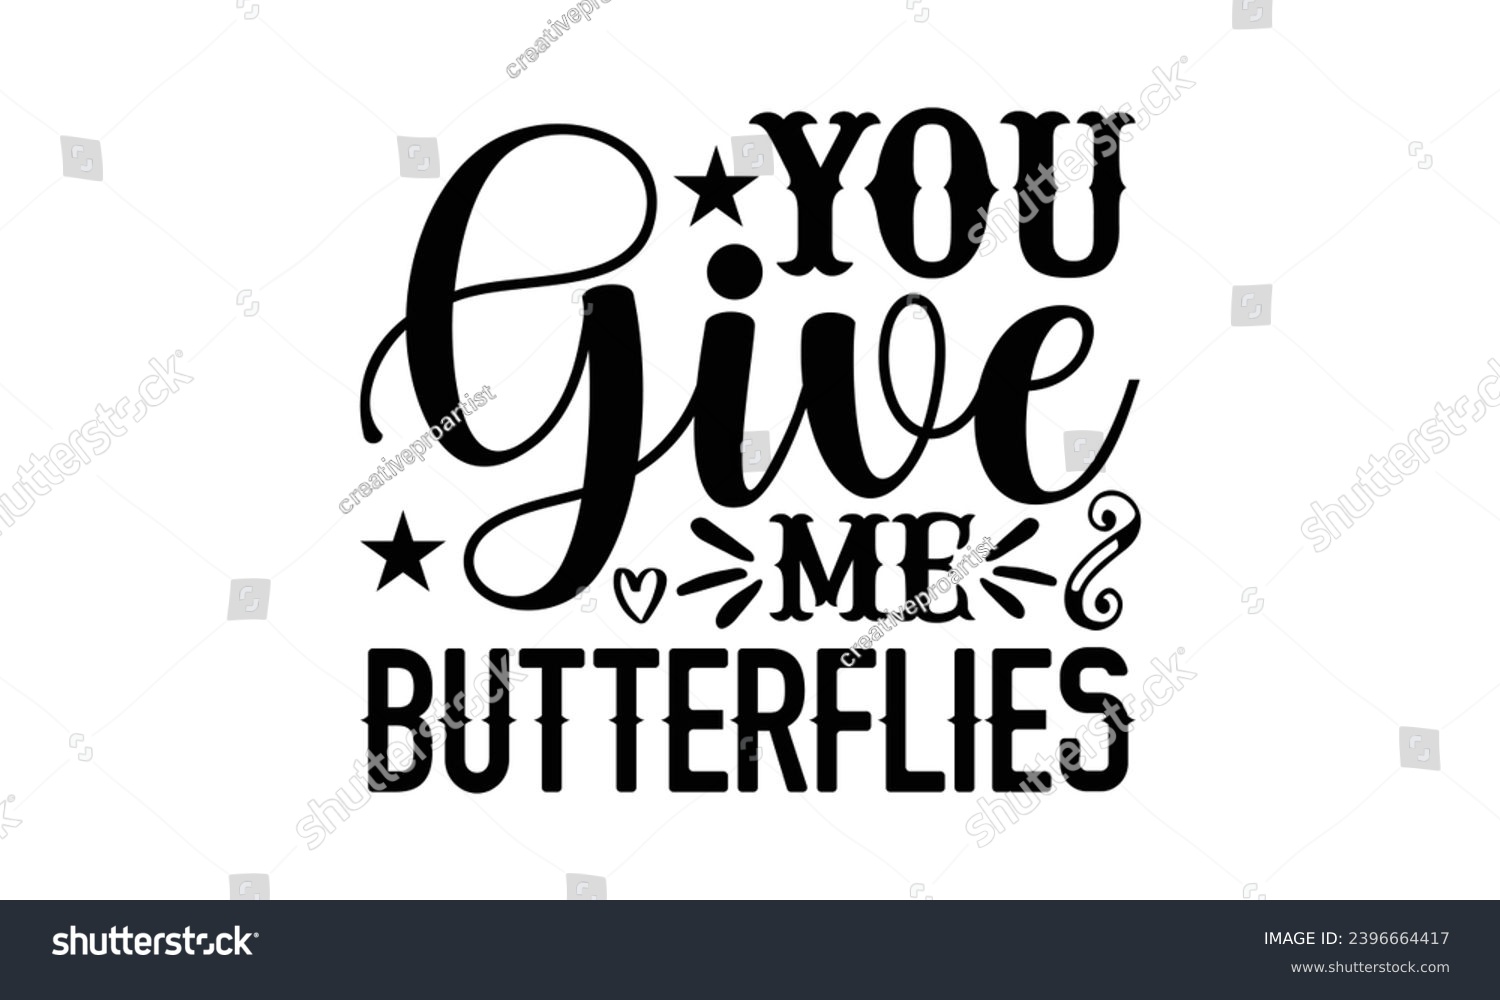 SVG of You Give Me Butterflies- Butterfly t- shirt design, Handmade calligraphy vector illustration for Cutting Machine, Silhouette Cameo, Cricut, Vector illustration Template eps svg